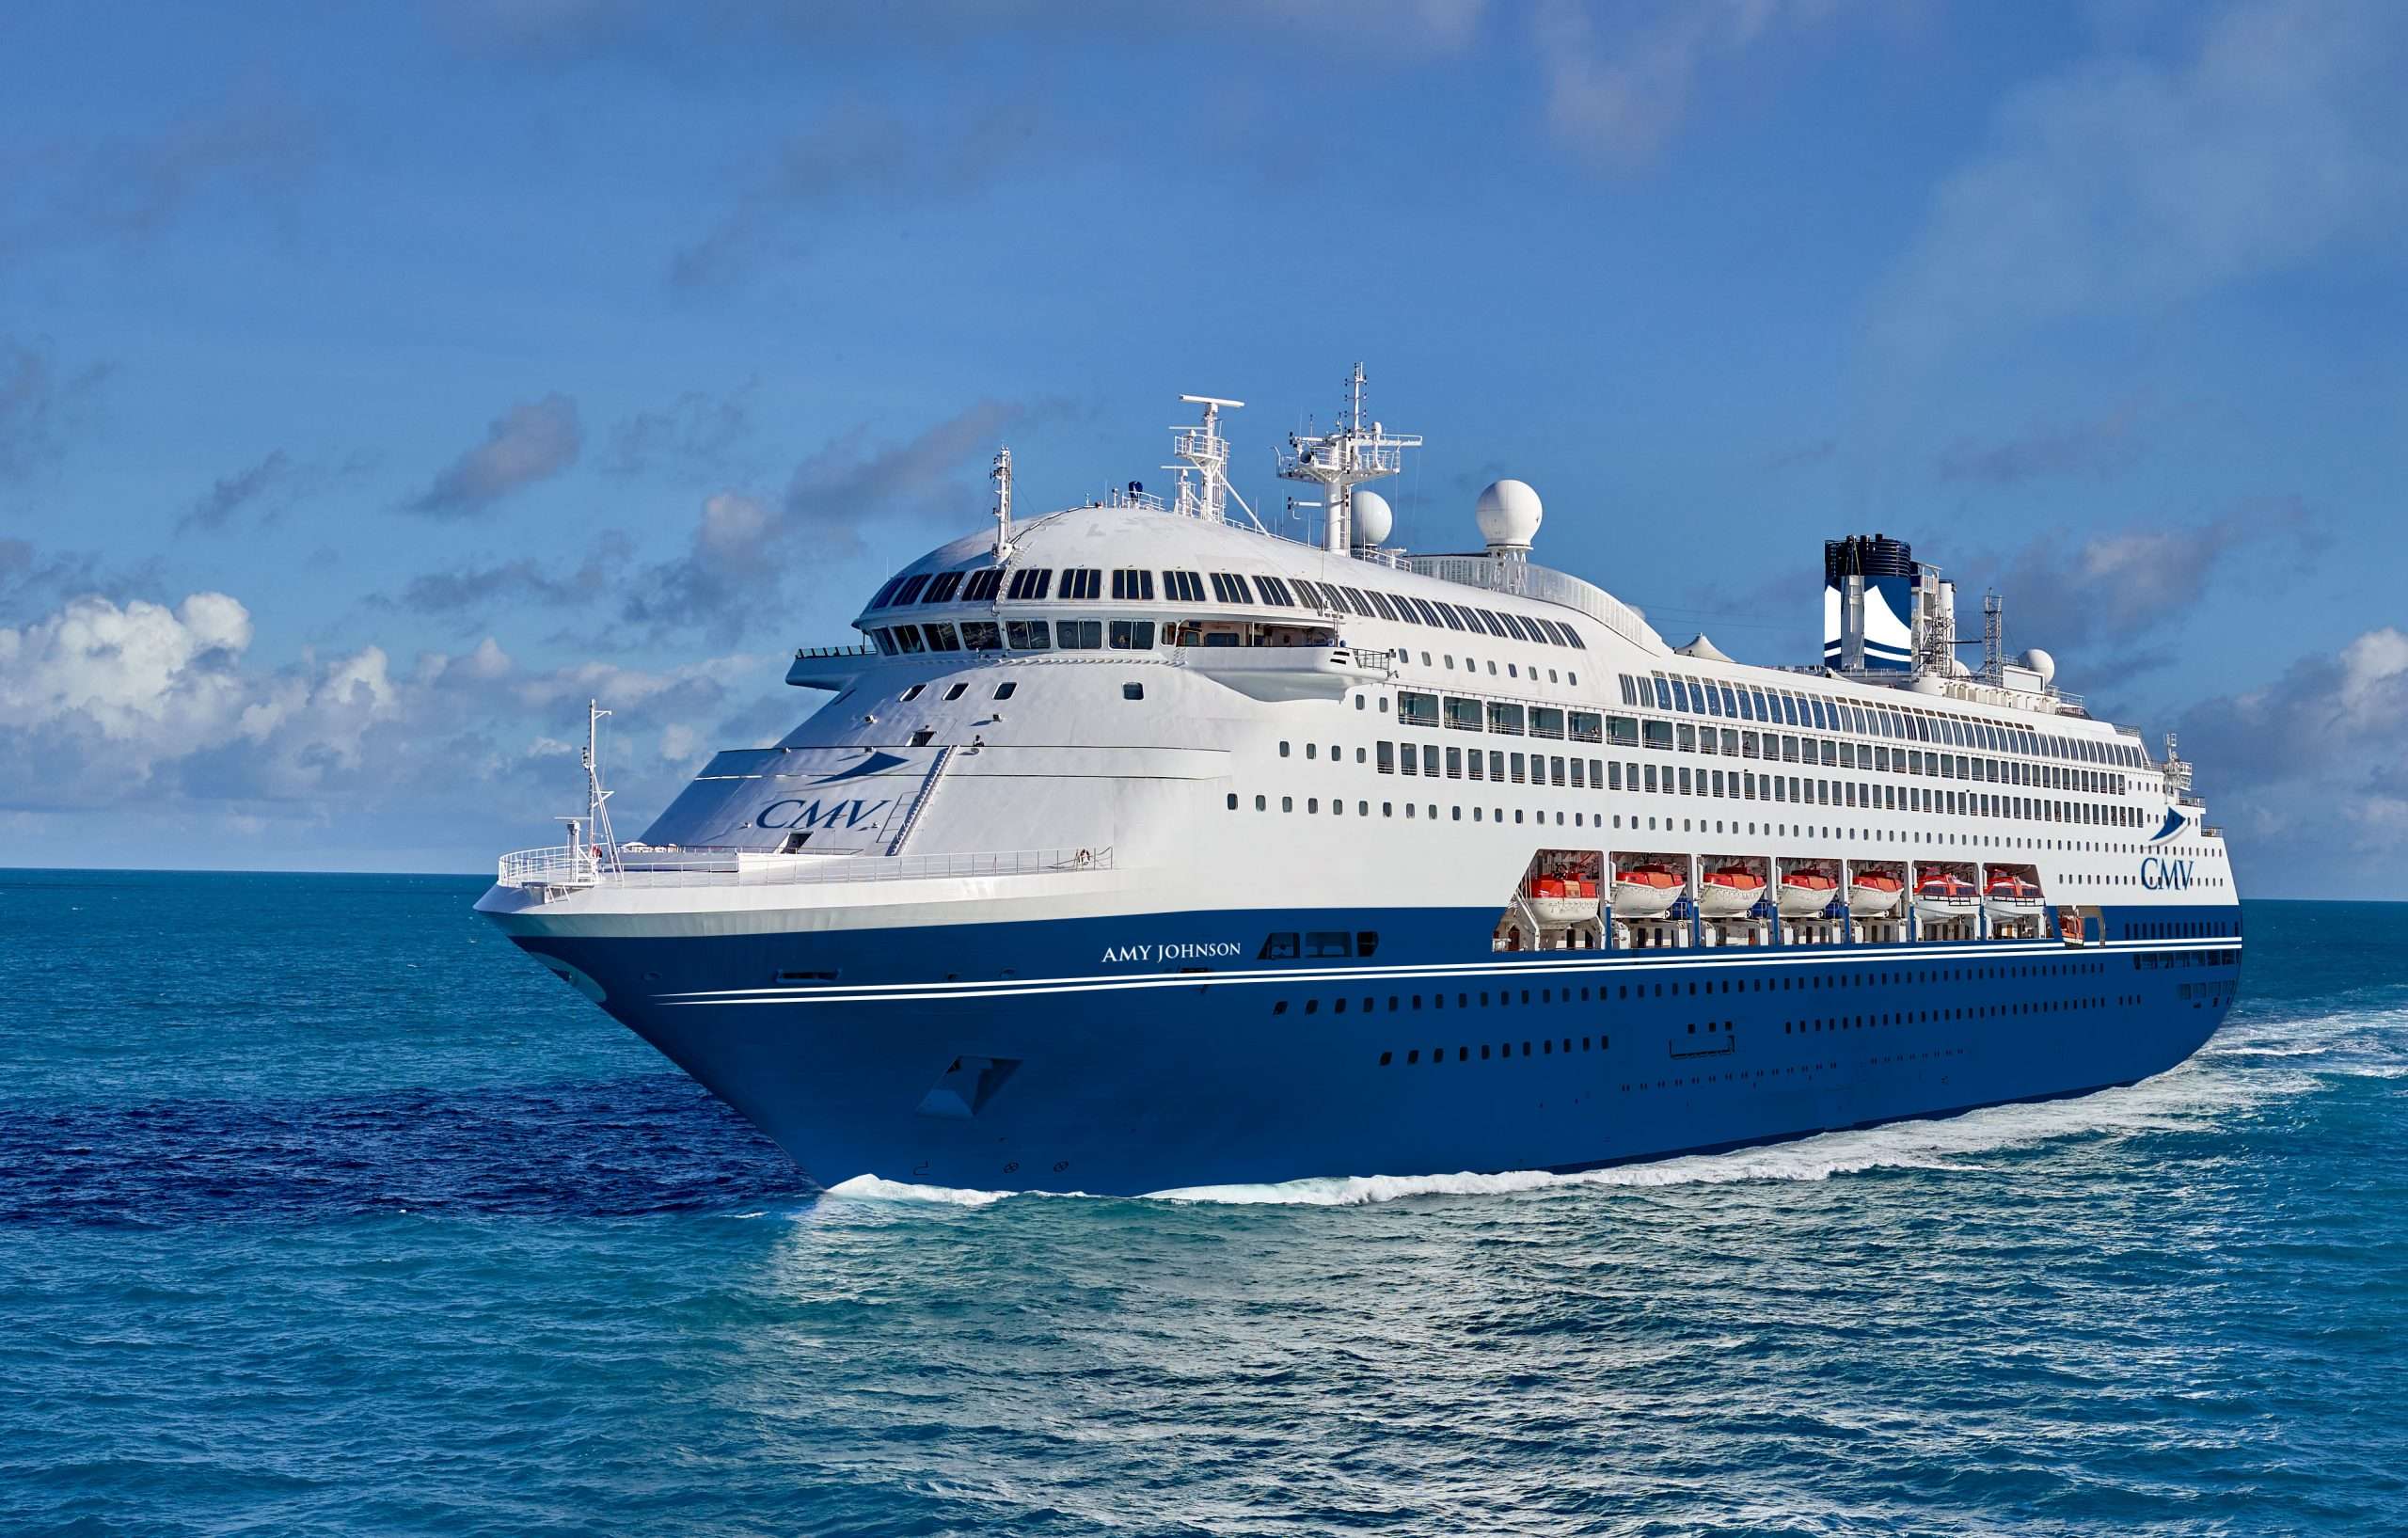 Cruise & Maritime Voyages unveils names of two new ships ...